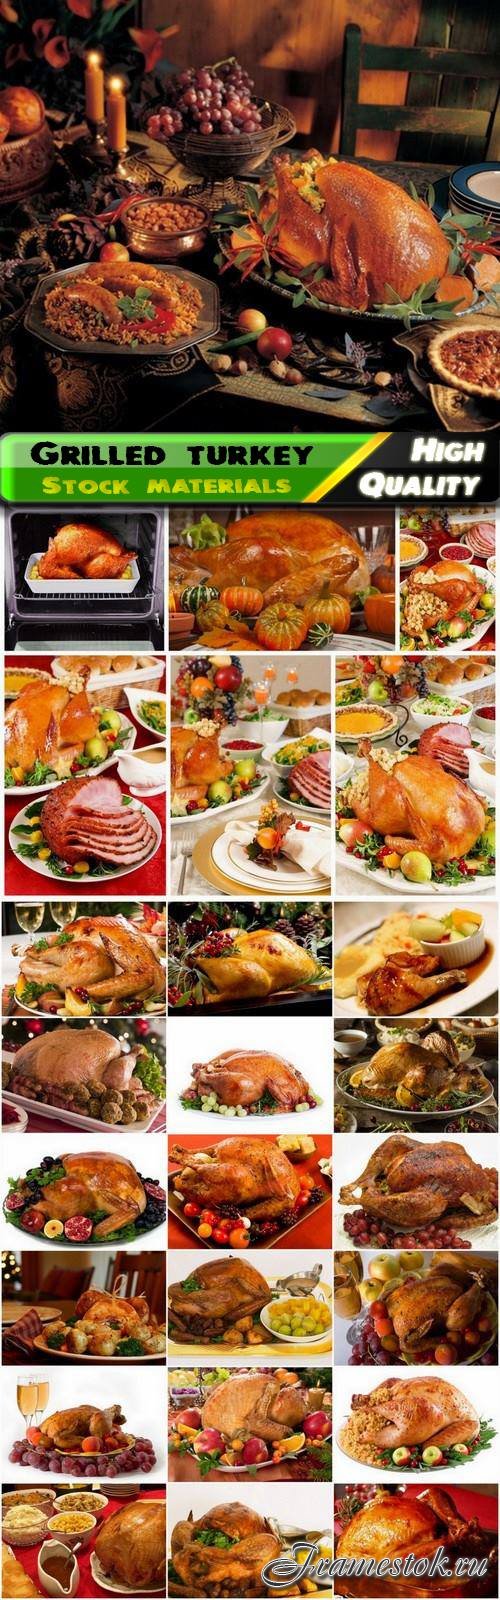 Grilled turkey for Christmas with garnish - 25 HQ Jpg